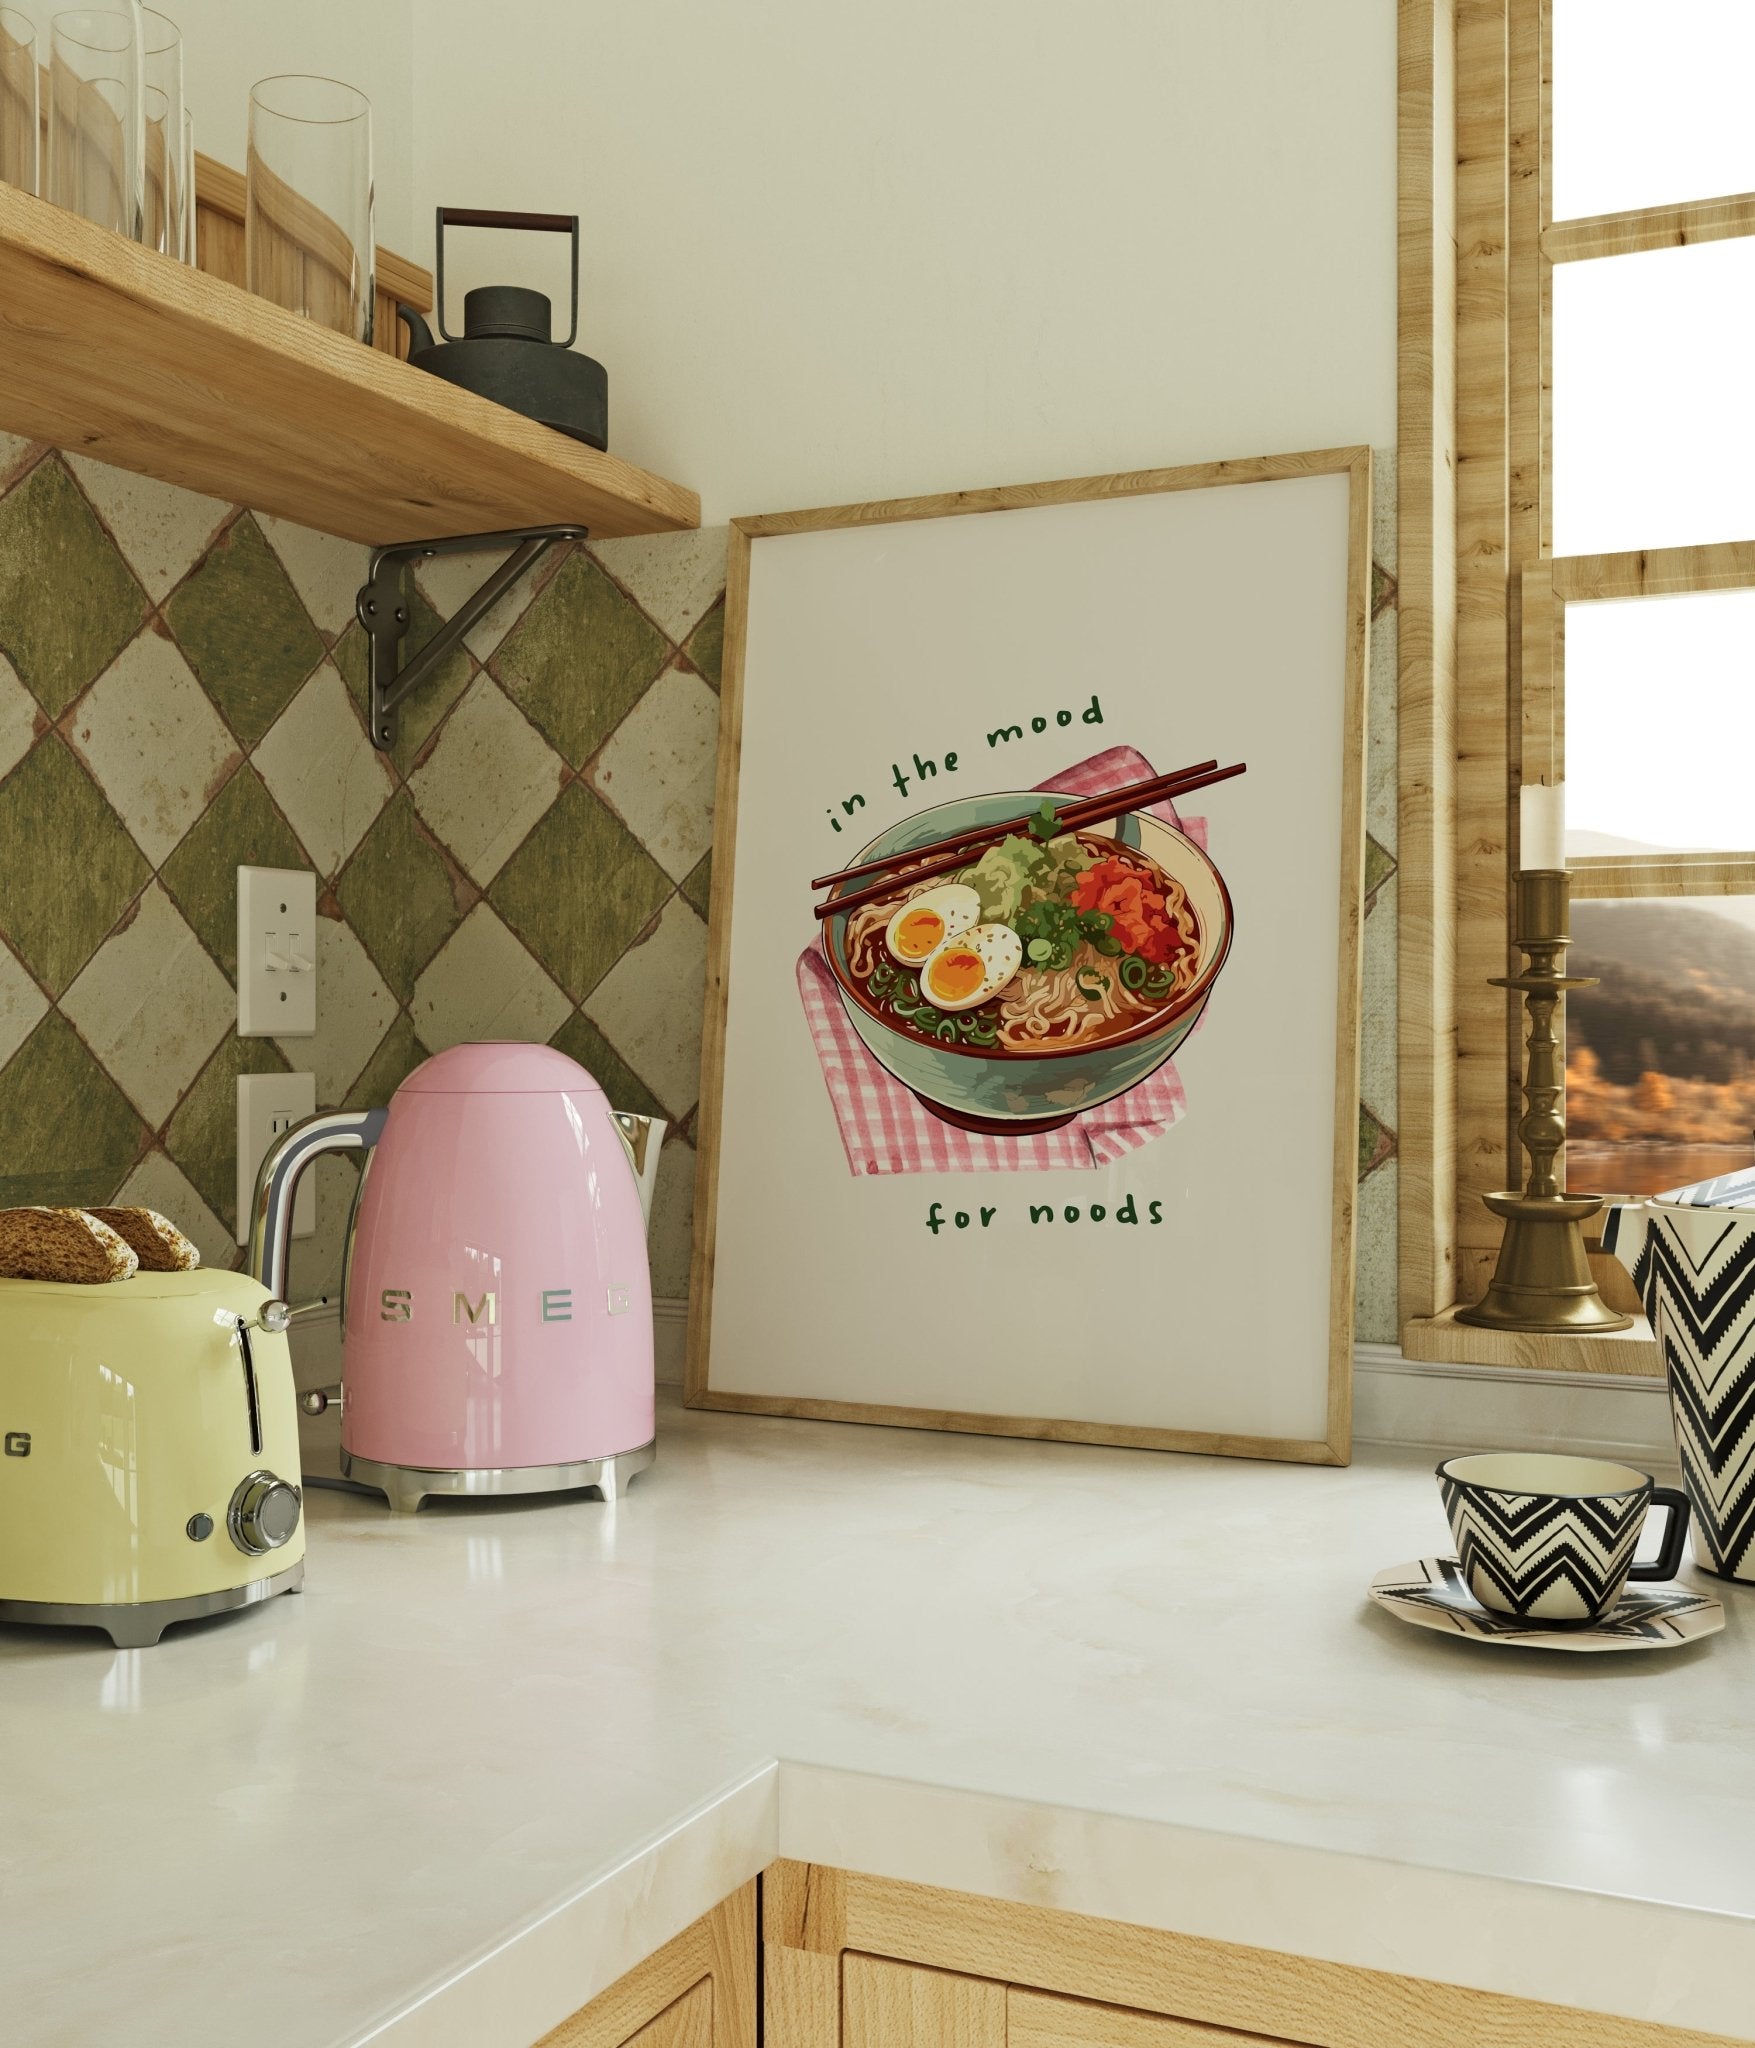 In The Mood for Noods Kitchen Print